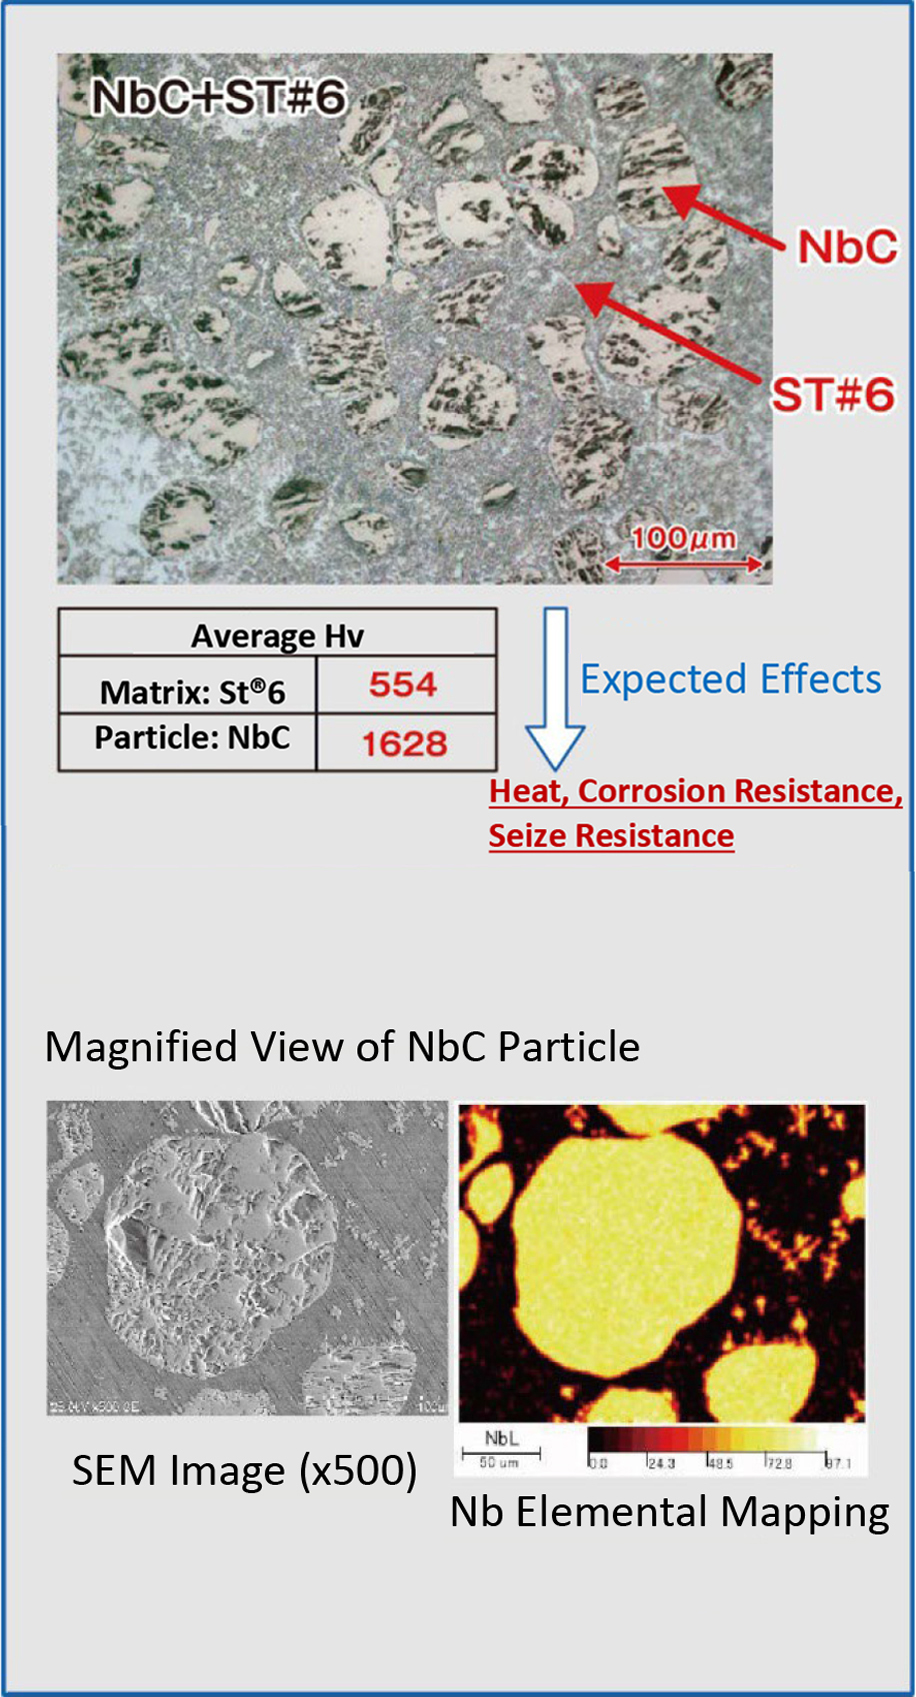 Magnified View of NbC Particle